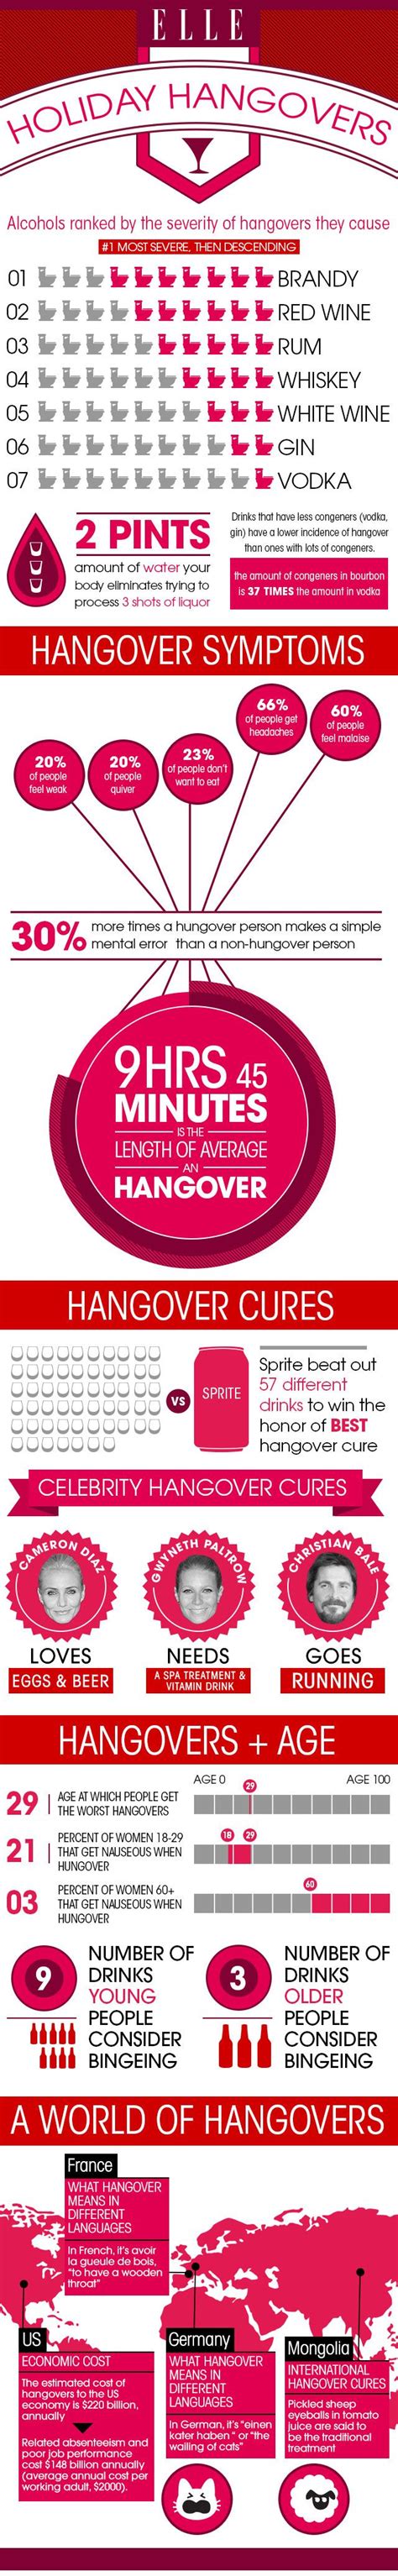 How To Survive Your Holiday Hangover Hangover Cure The Cure Hangover